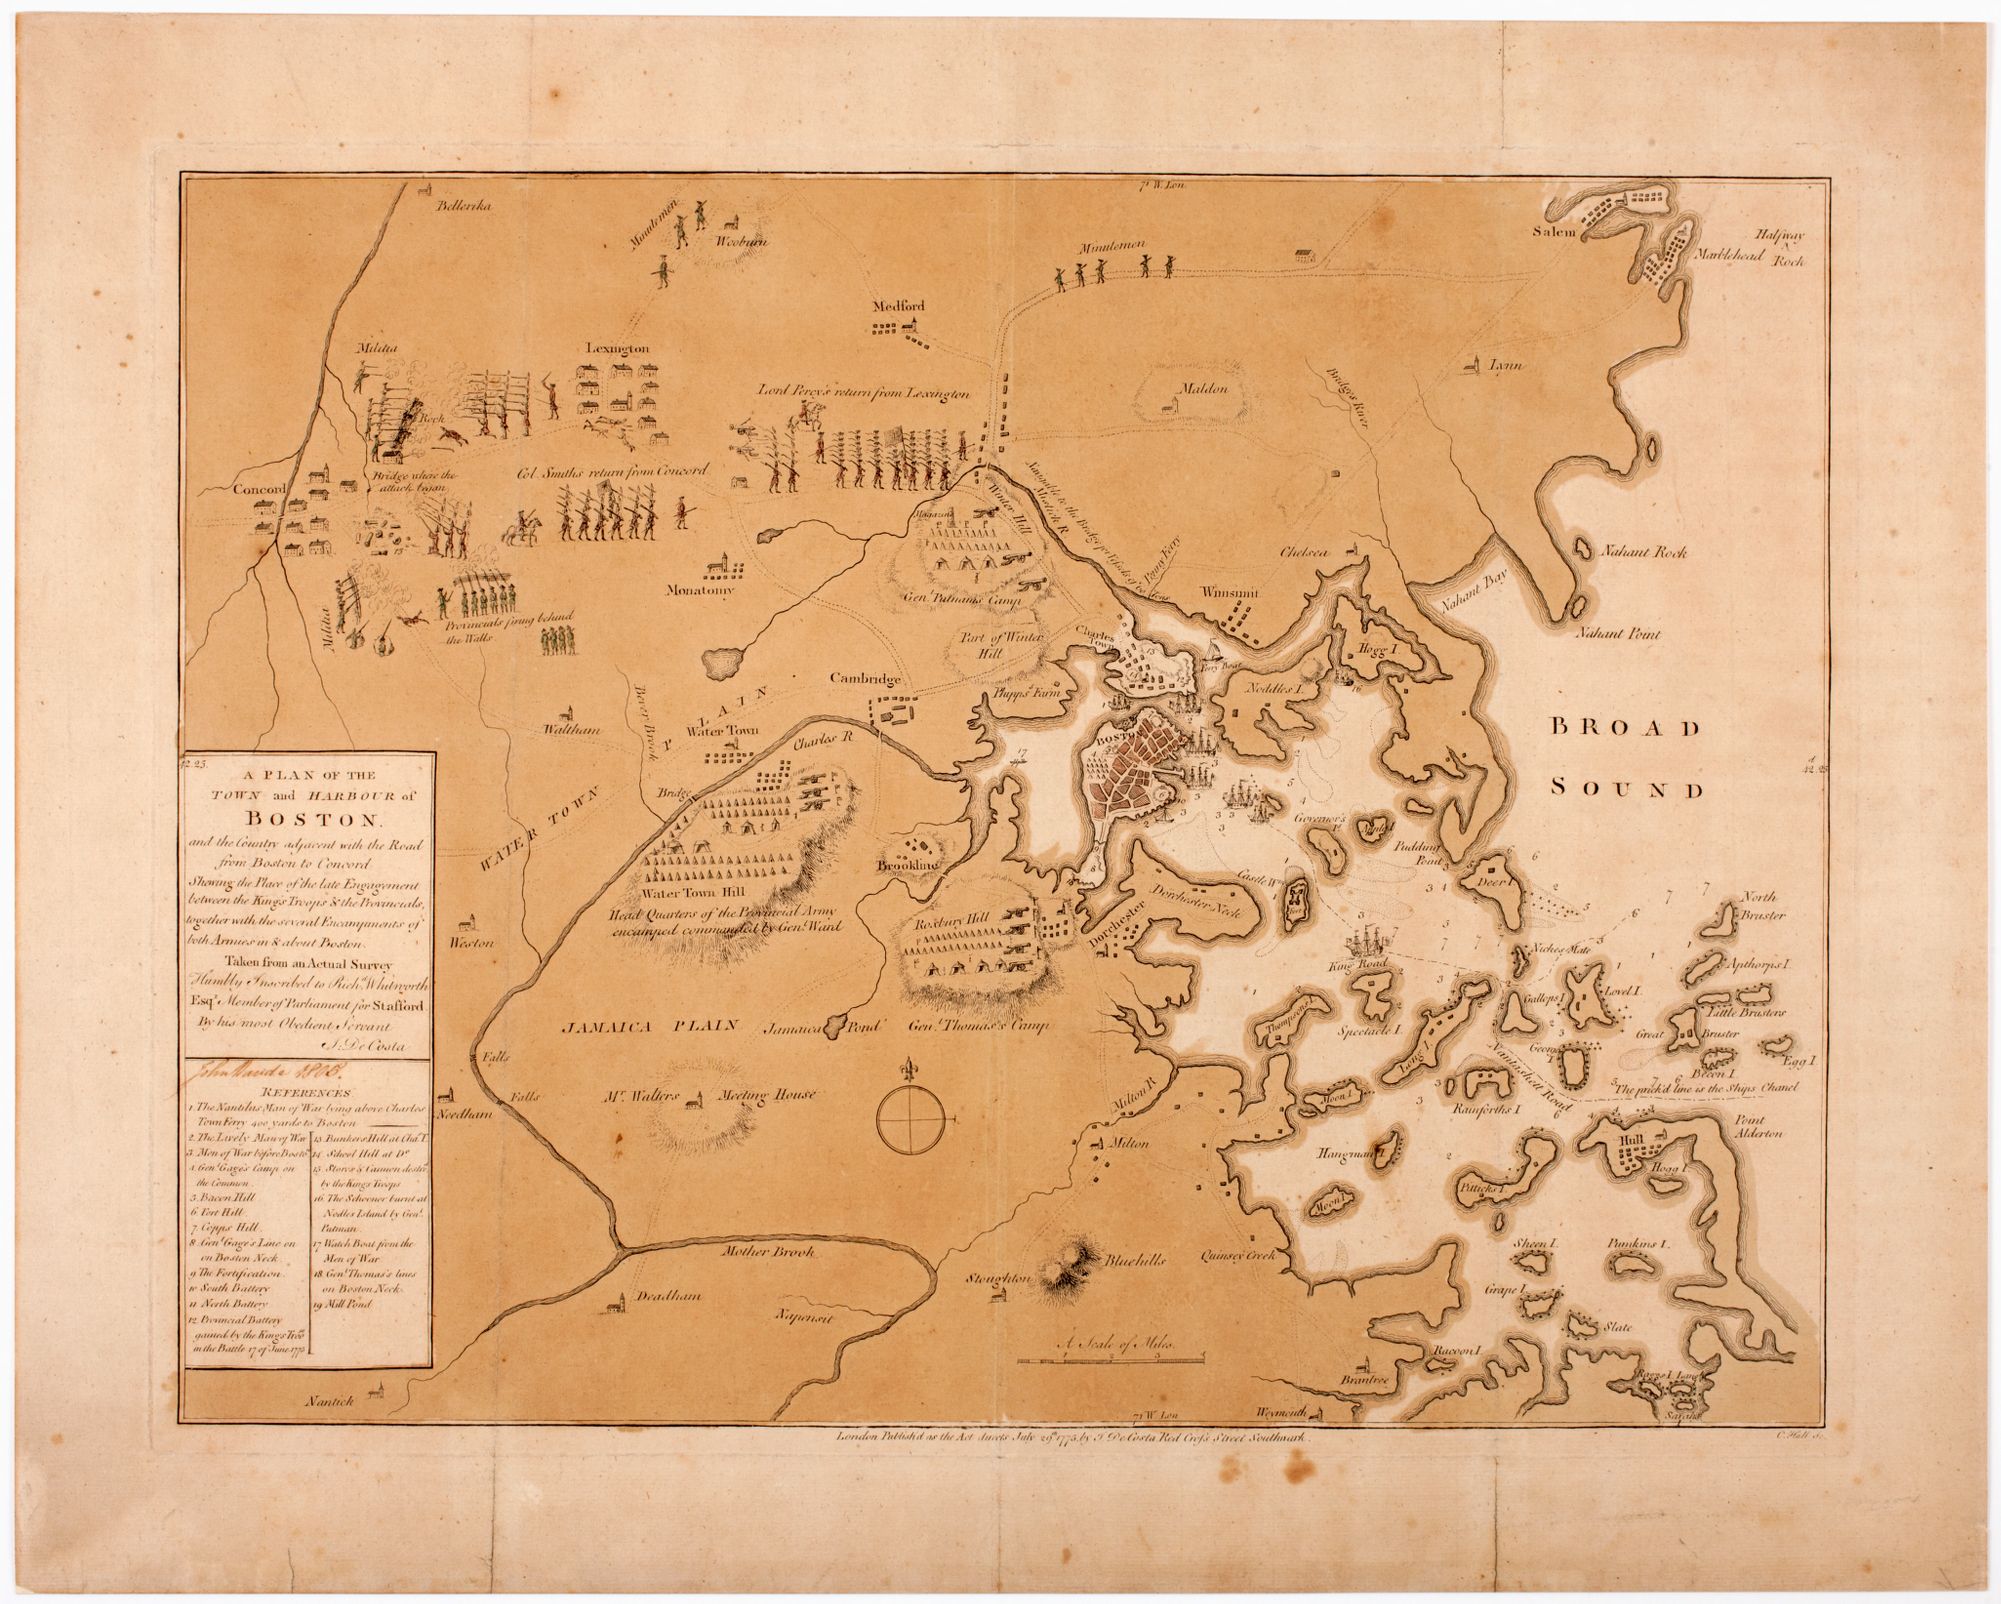 The ARGO portal collates digitized maps of North America made between 1750 and 1800 into a user-friendly portal, like this map from 1775.